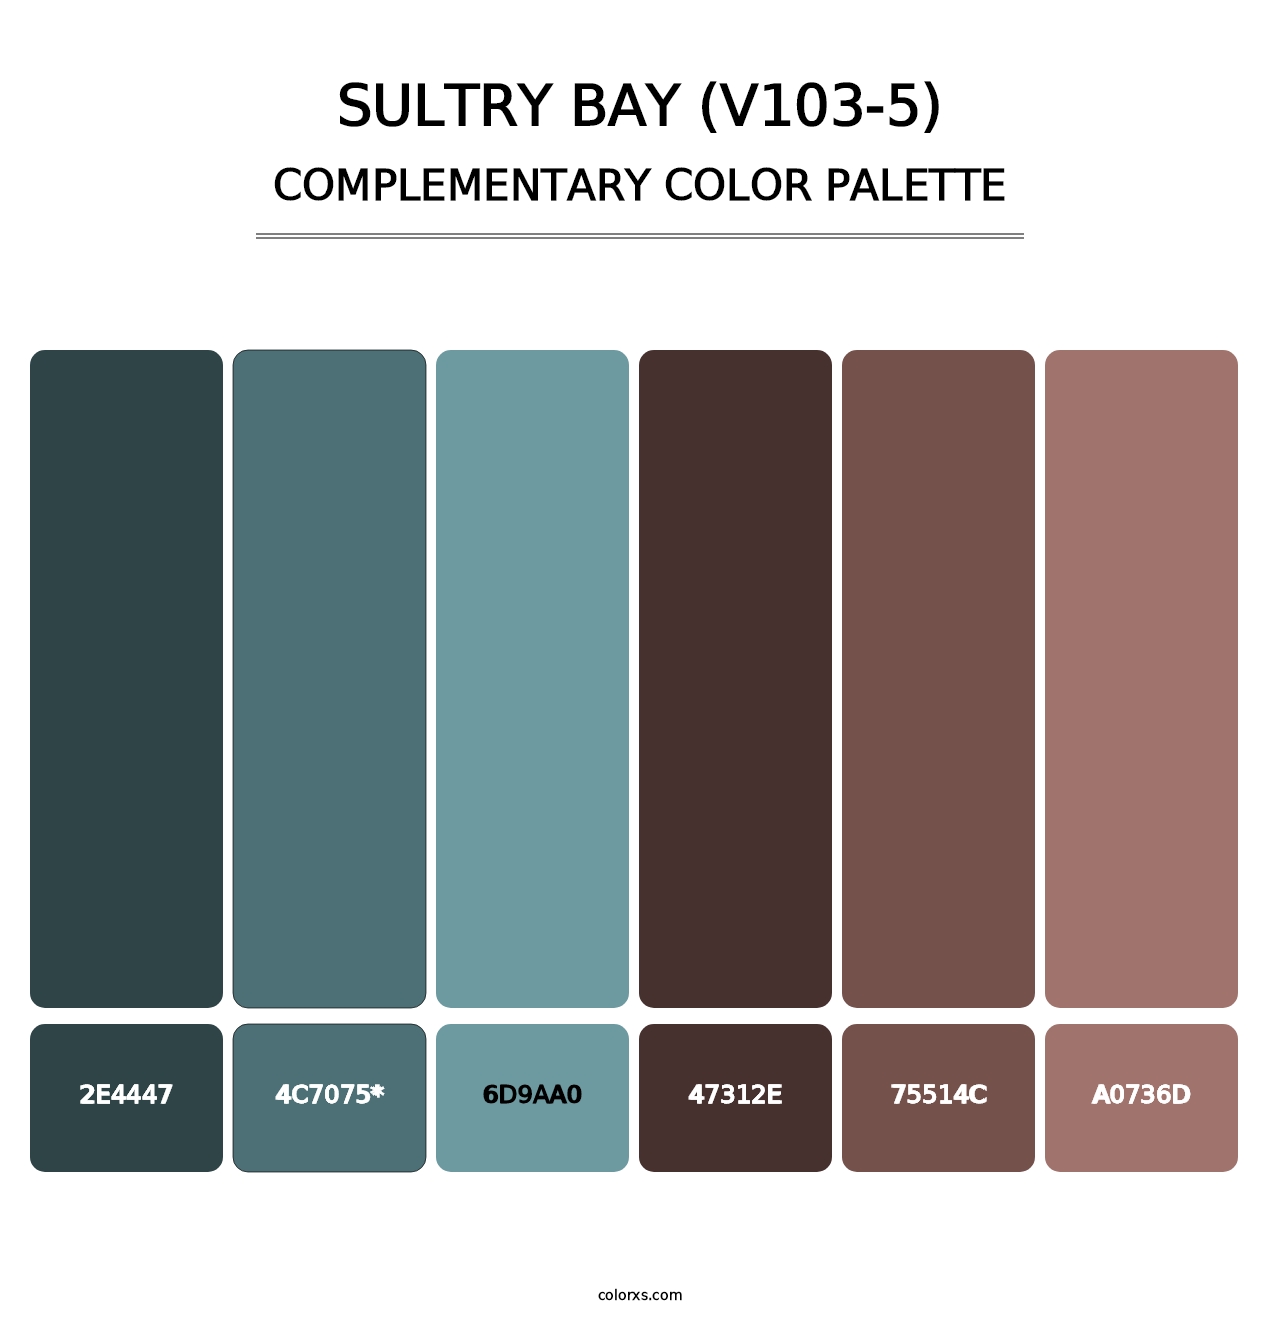 Sultry Bay (V103-5) - Complementary Color Palette